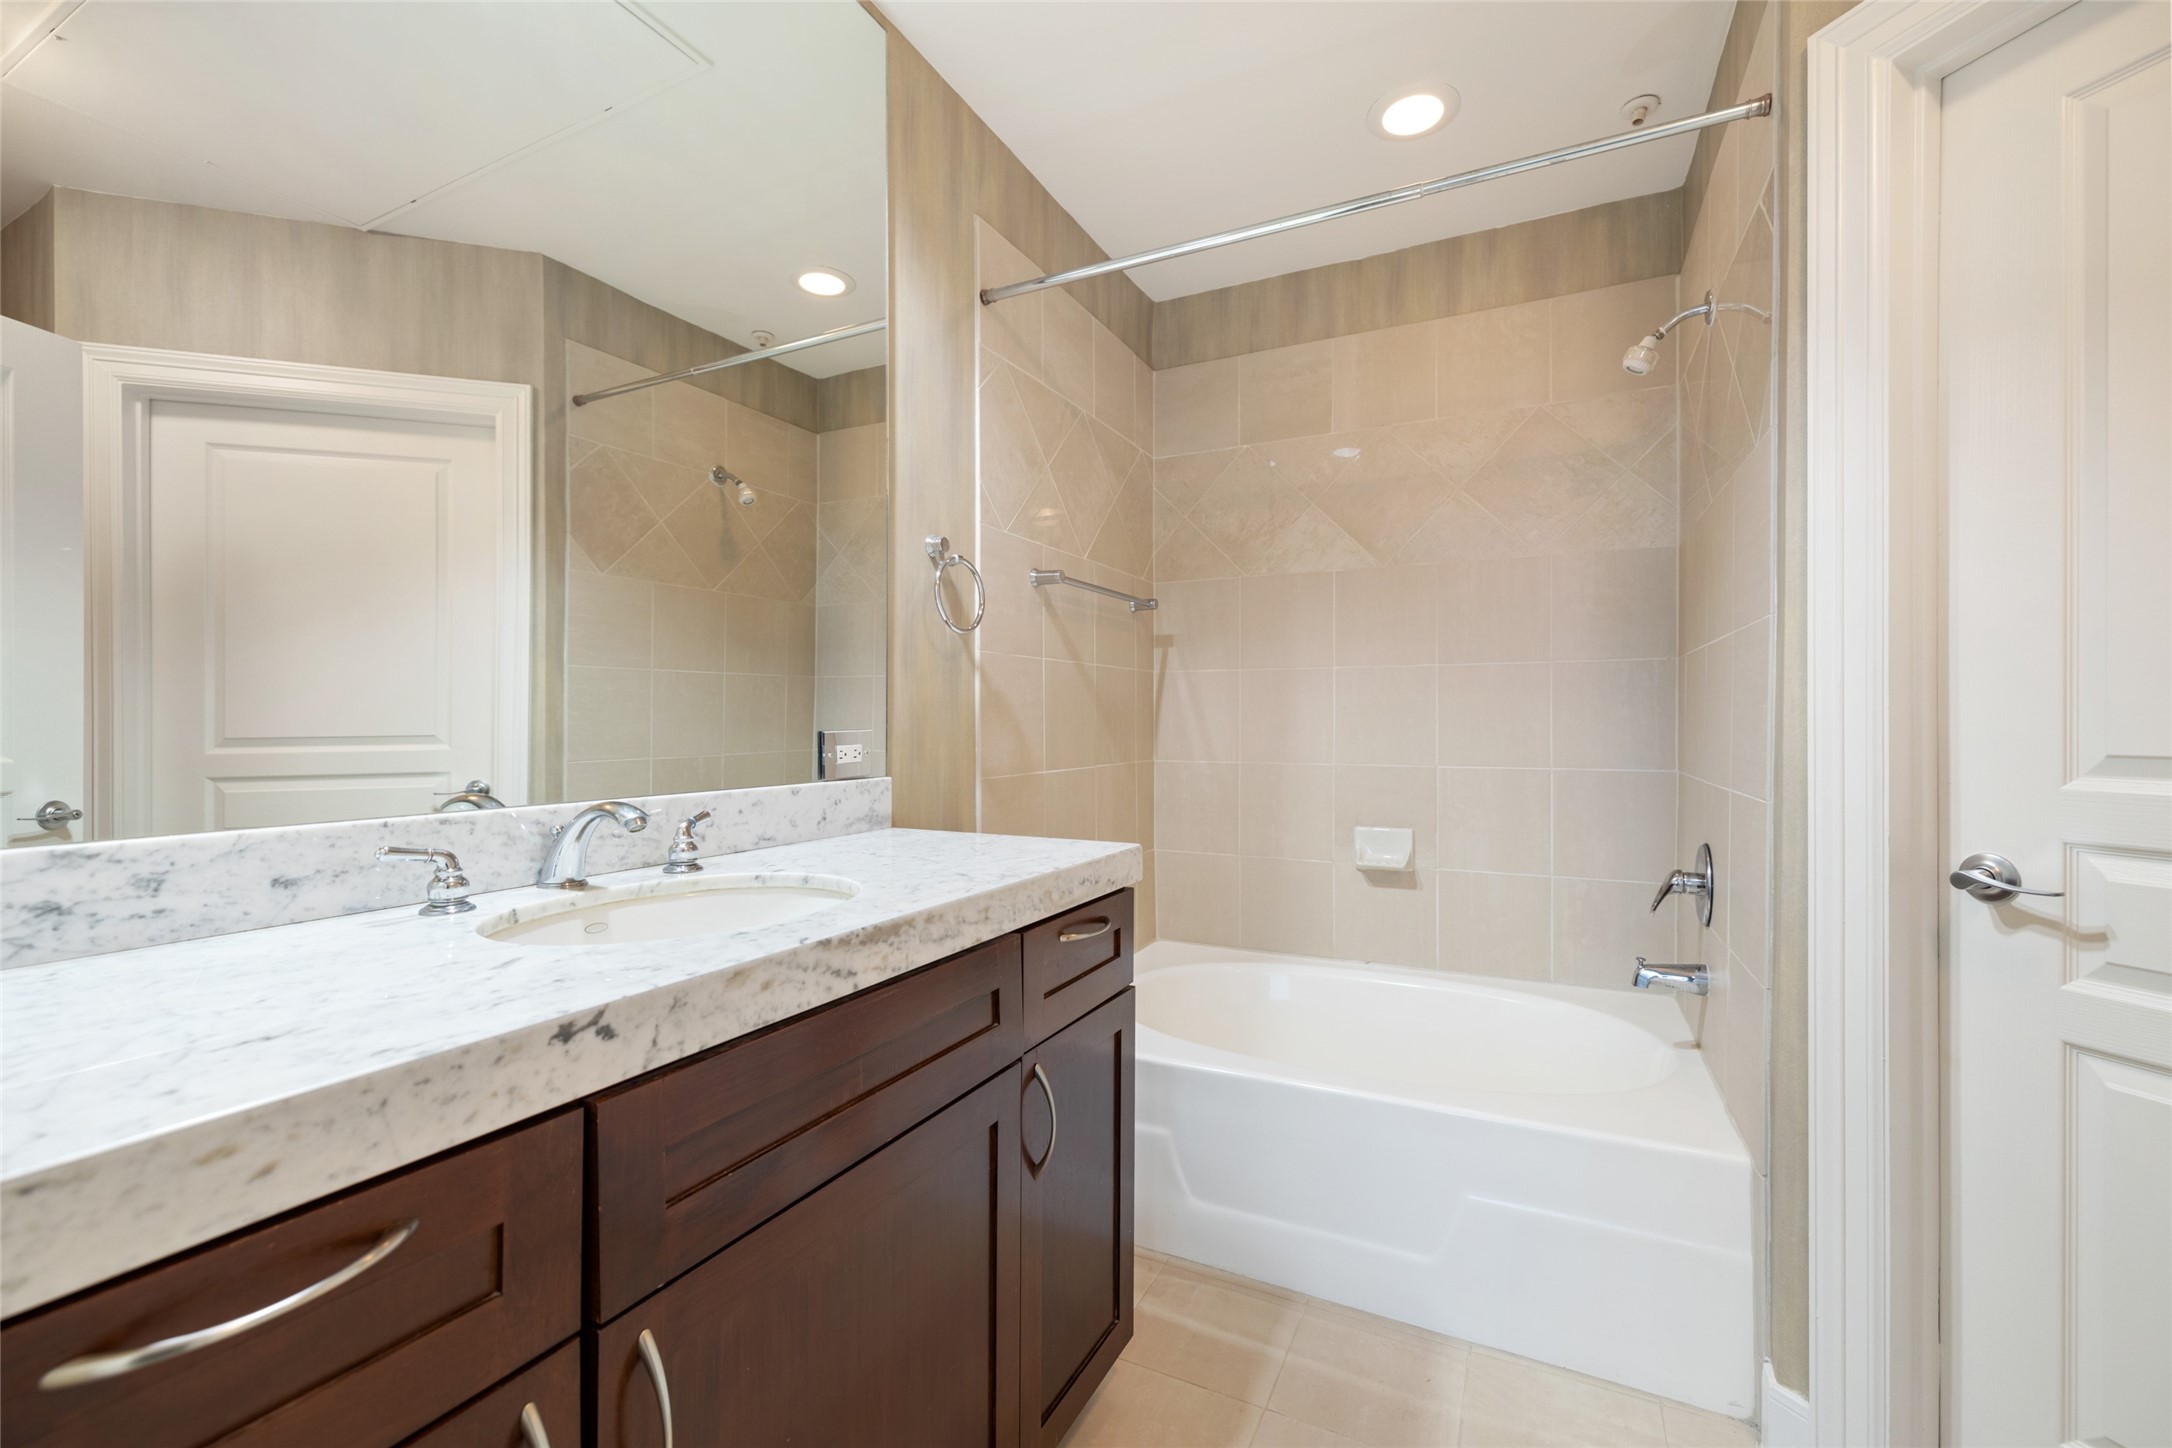 This Bathroom features marble counters, large soaking tub/shower combo, and great storage.